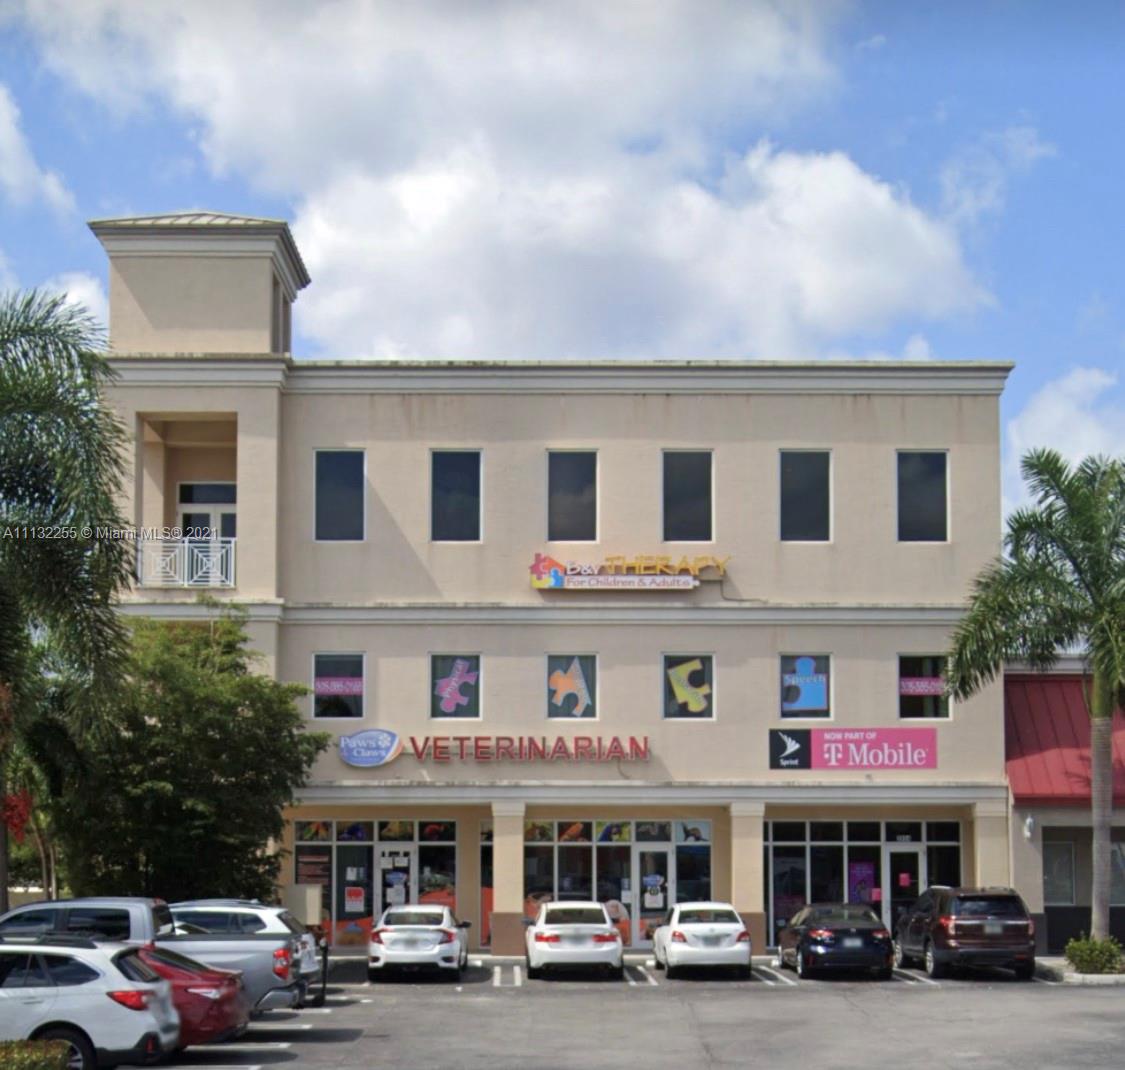 VERY RARELY AVAILABLE RETAIL SPACE IN ONE OF THE BEST LOCATIONS FOR A COMMERCIAL BUSINESS!!! CURRENTLY A T-MOBILE STORE. NEGOTIABLE LEASE TERMS, CONTACT OWNER/REALTOR TO DISCUSS POSSIBLE LEASE TERMS. SPACE ON DIGITAL SIGN AVAILABLE AS WELL! WILL NOT LAST ON THE MARKET!